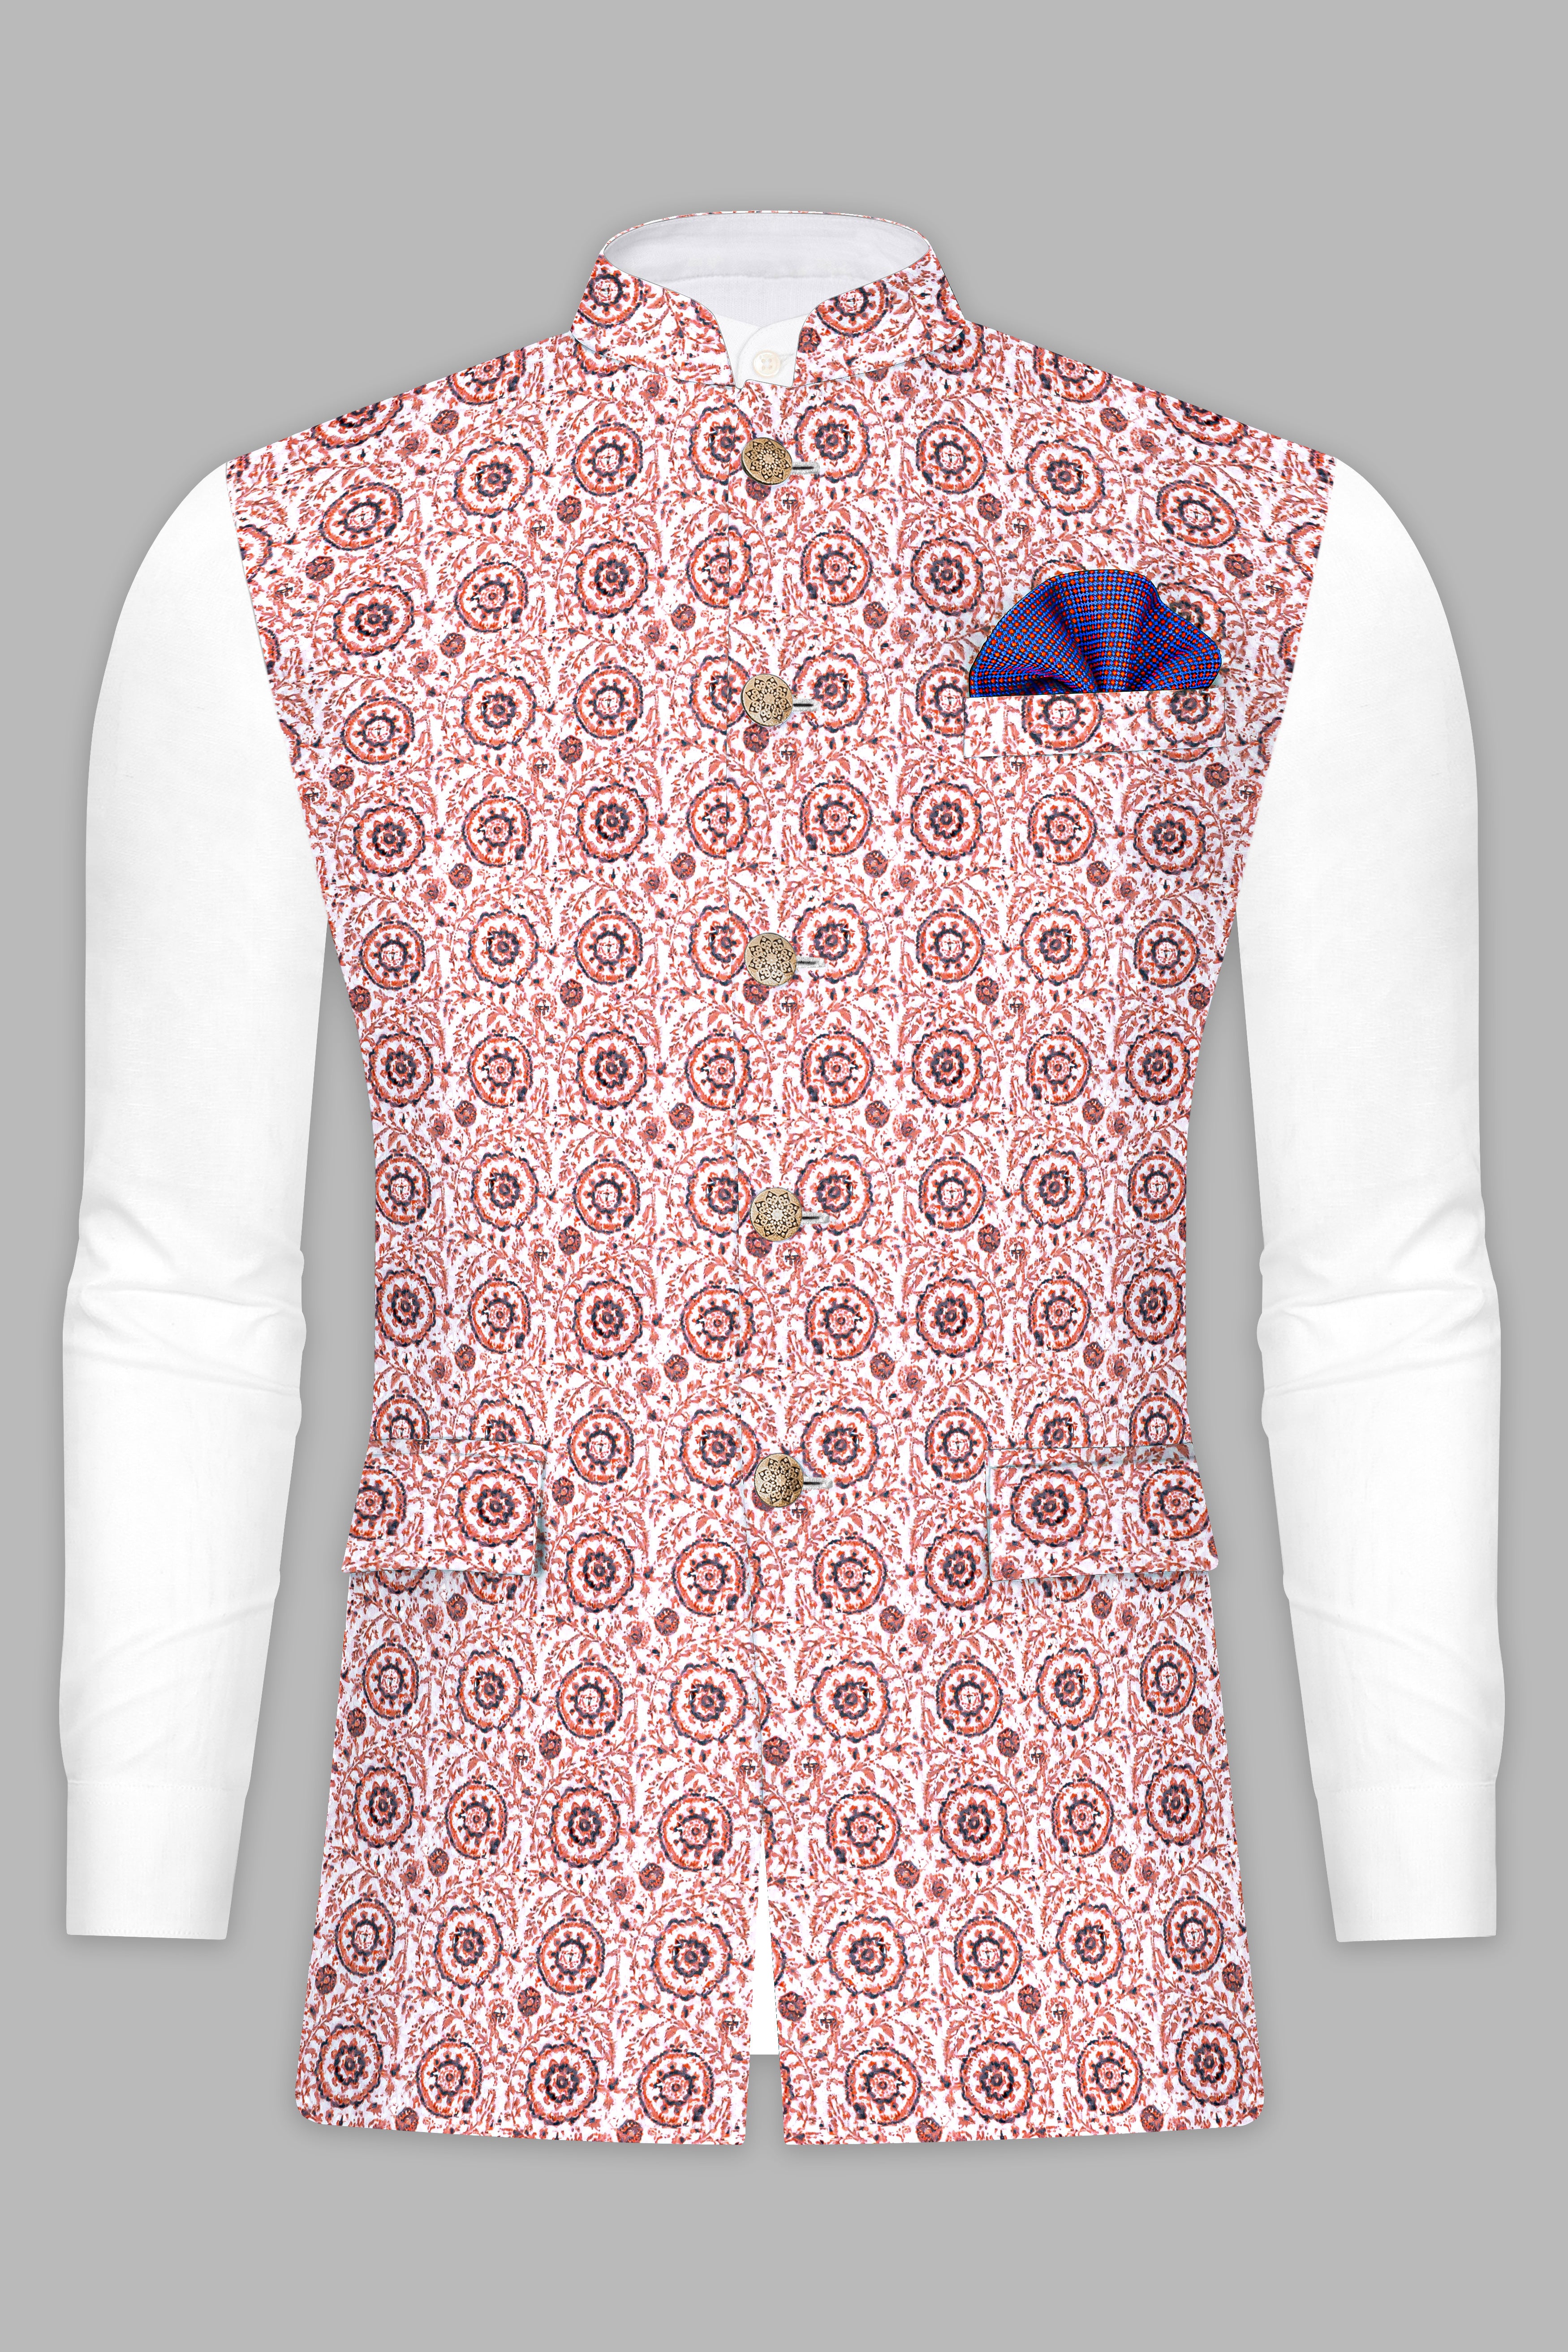 Copper Rust Brown And Bright White Embroidered Nehru Jacket